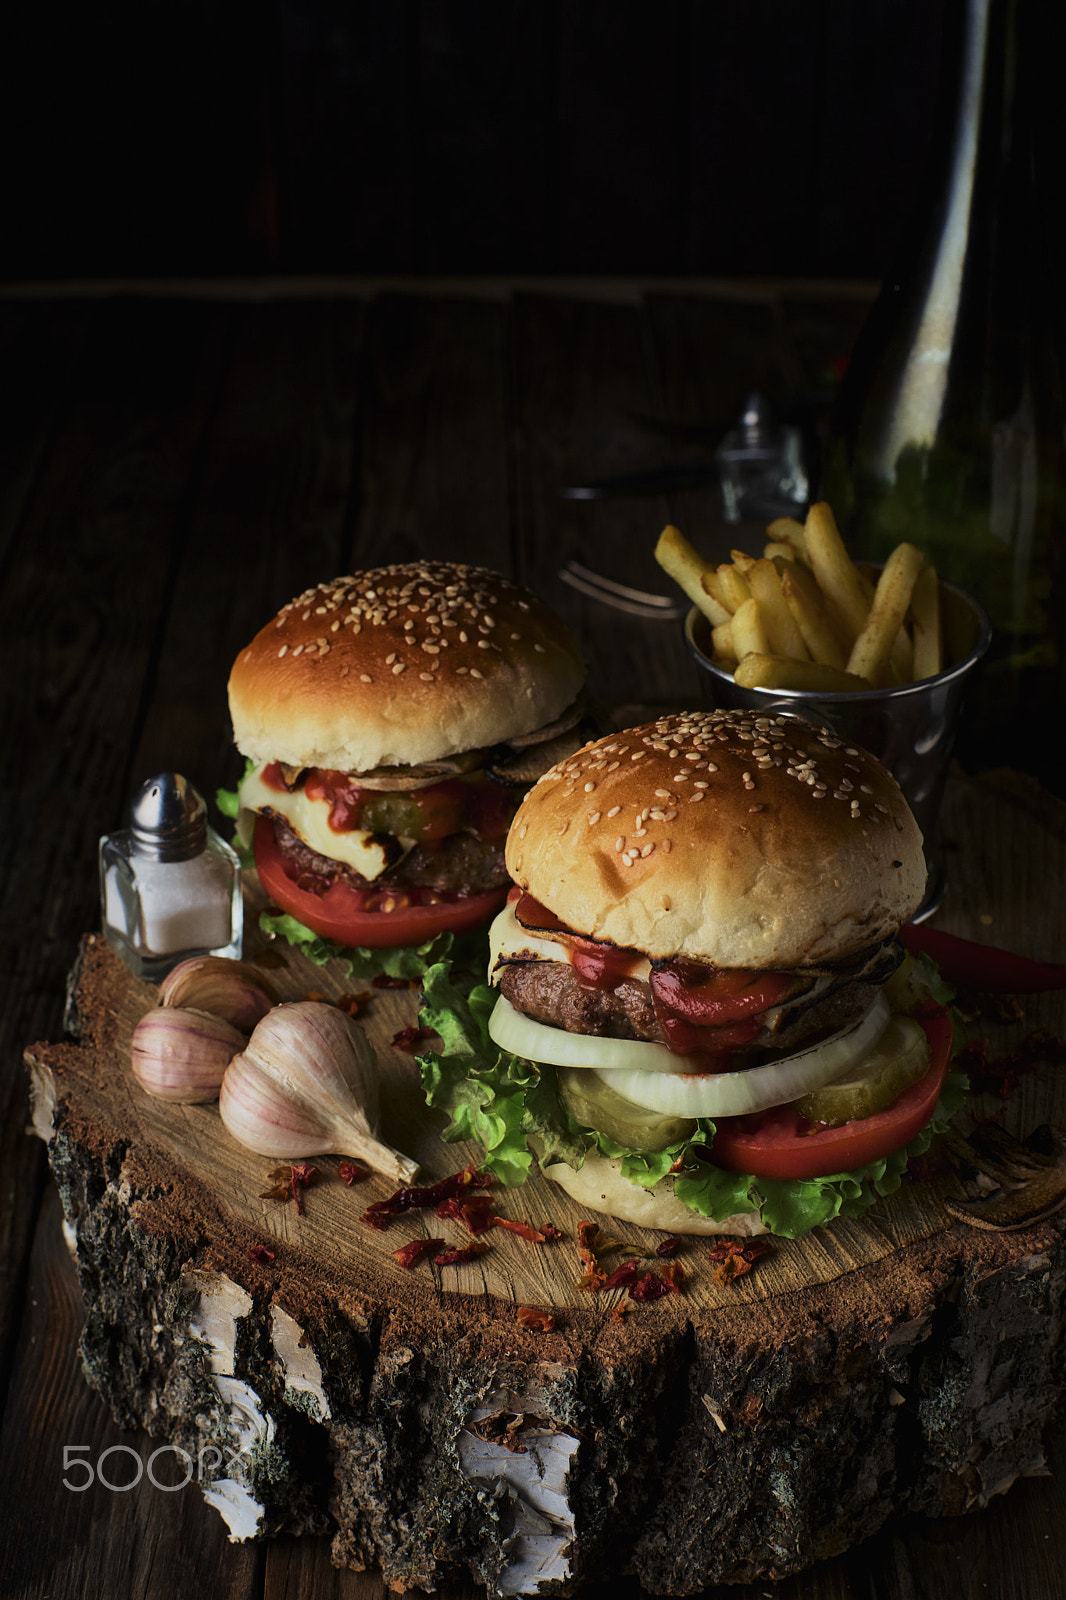 Sony a99 II sample photo. Two beef burgers on a dark background. photography